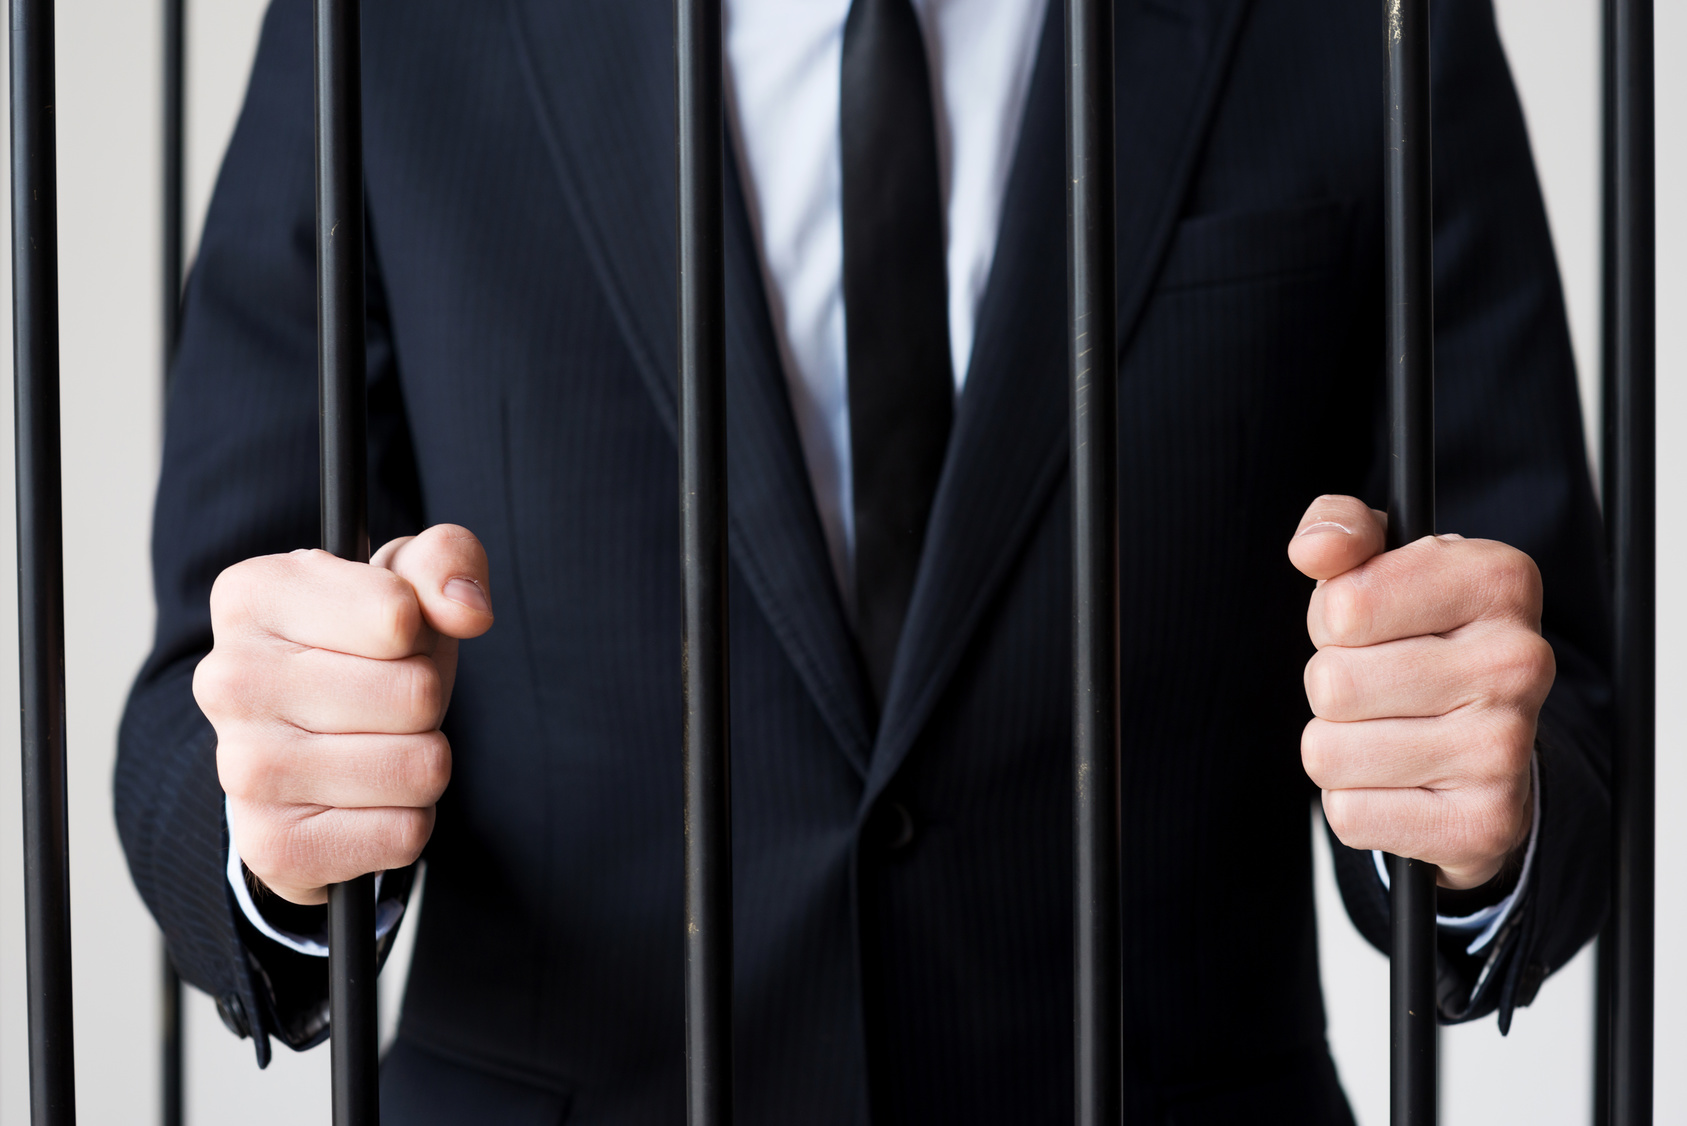 WHAT IS WHITE COLLAR CRIME?